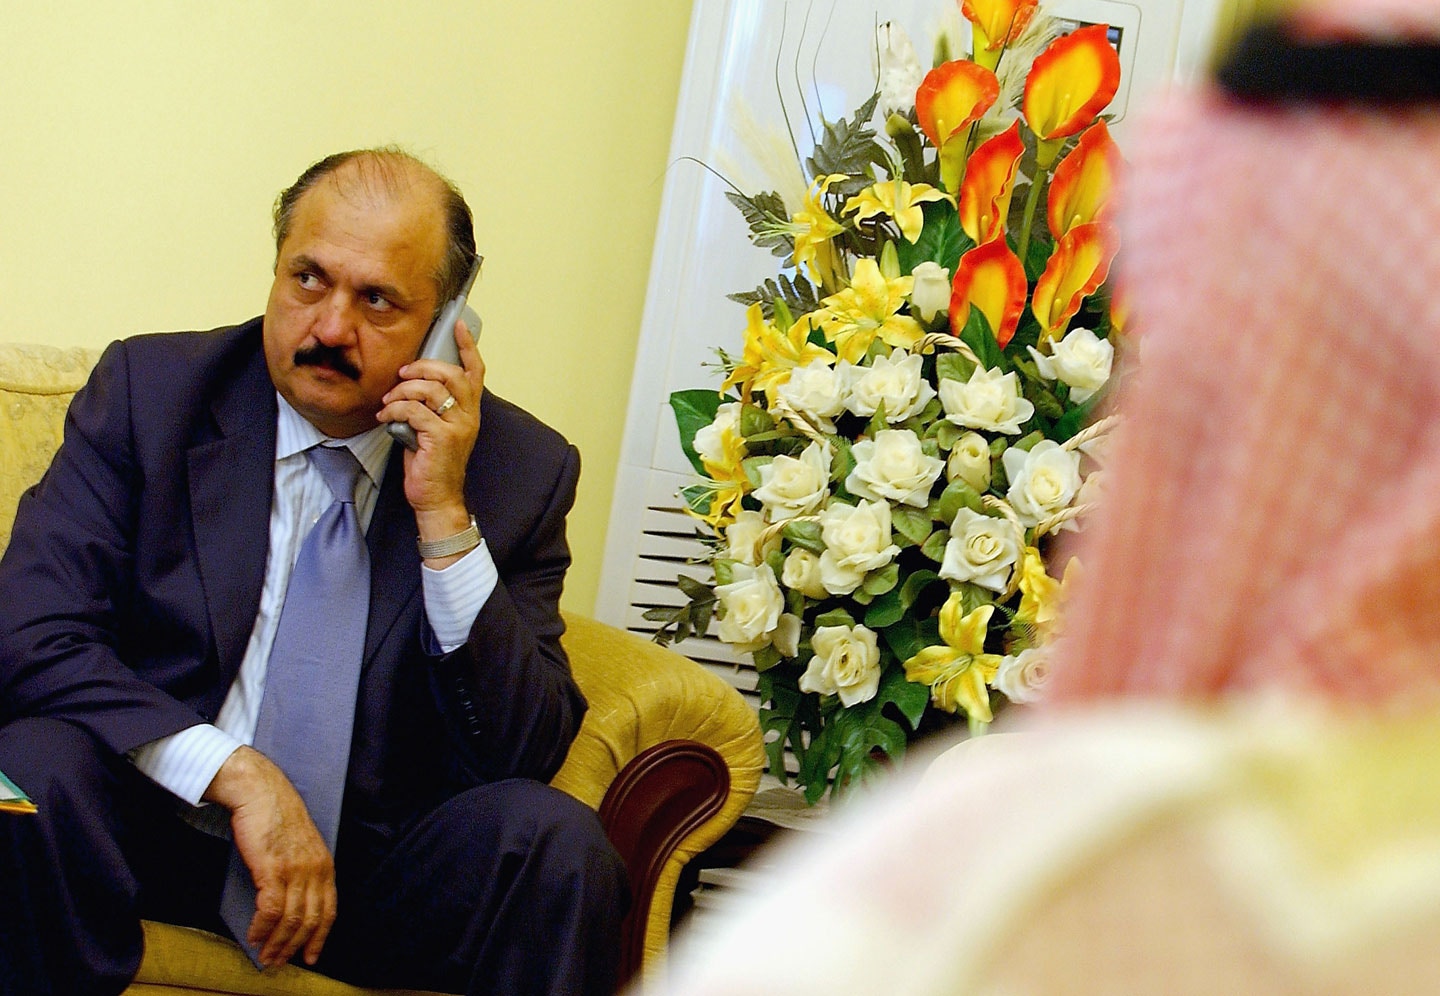 BAGHDAD, IRAQ - APRIL 2:  Sunni Arab member of Iraqi Transitional National Assembly (TNA) and a candidate for the post of parliament speaker Meshaan al-Jubouri speaks on the phone April 2, 2005 in Baghdad, Iraq. Iraqi Transitional National Assembly will hold its third-ever session on April 3, 2005 after it failed Tuesday to agree on a parliament speaker. The TNA tries to choose a Sunni Arab speaker for the assembly a step officials hope will quell the Sunni-led insurgency. (Photo by Wathiq Khuzaie/Getty Images)